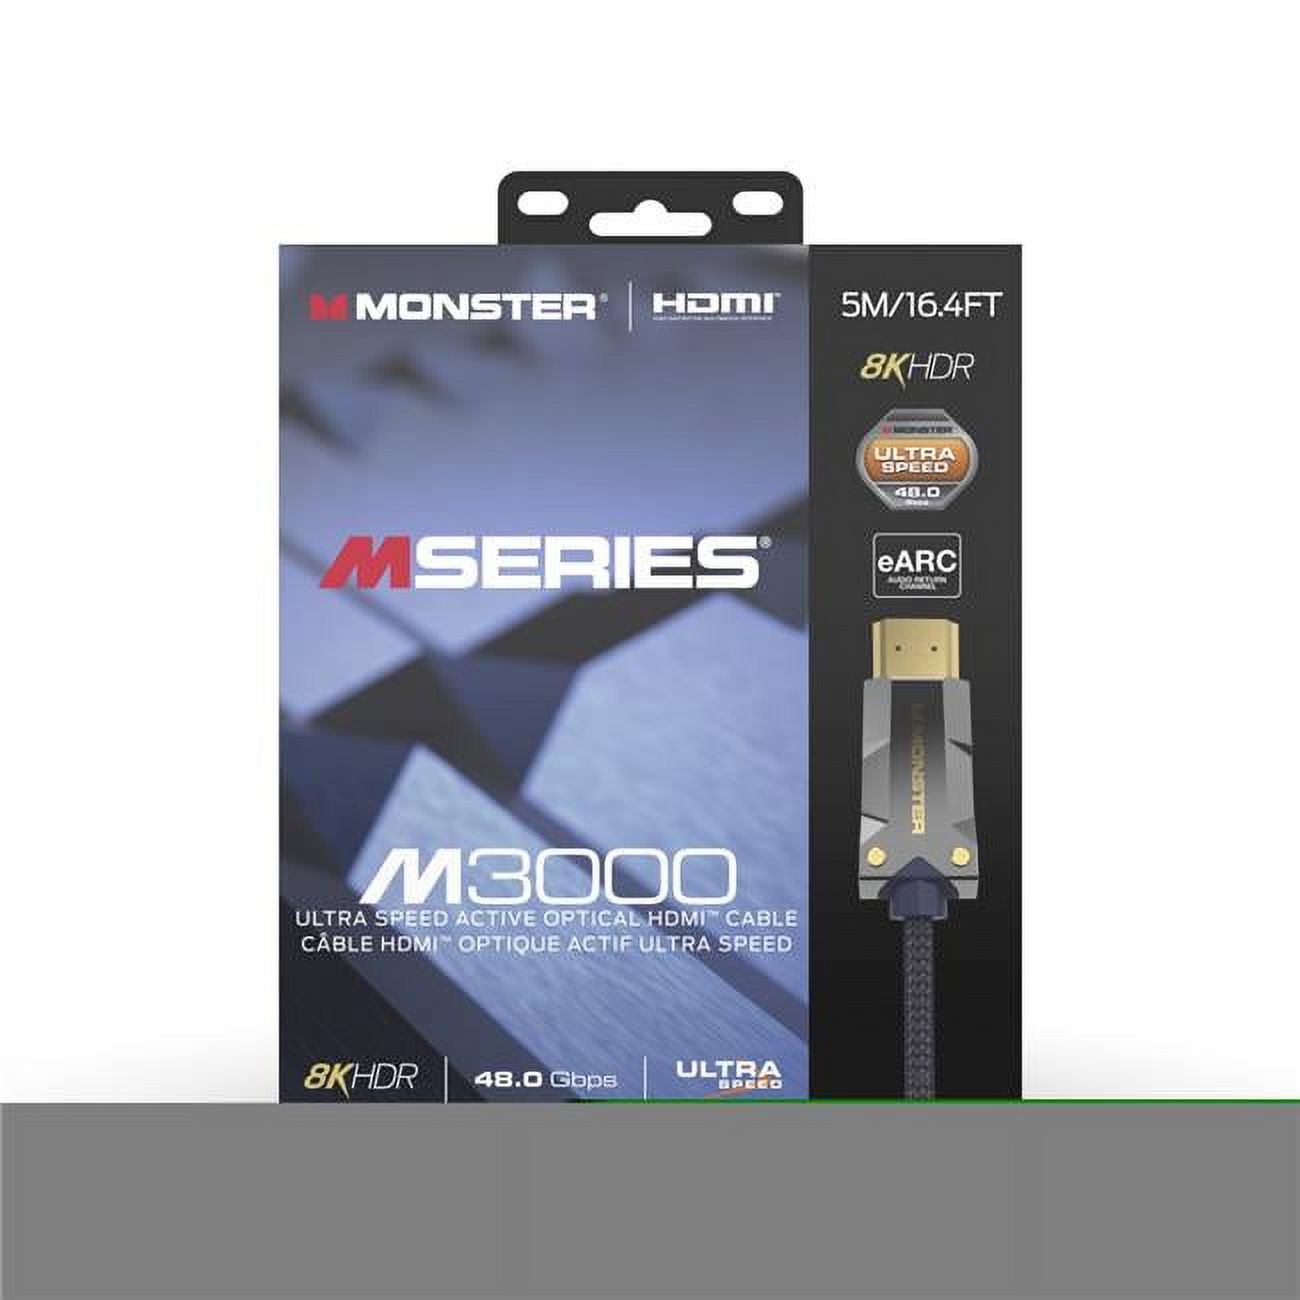 Monster Cable VMM20009-U M3000 HDMI 2.1 Cable - 5 m - image 1 of 1